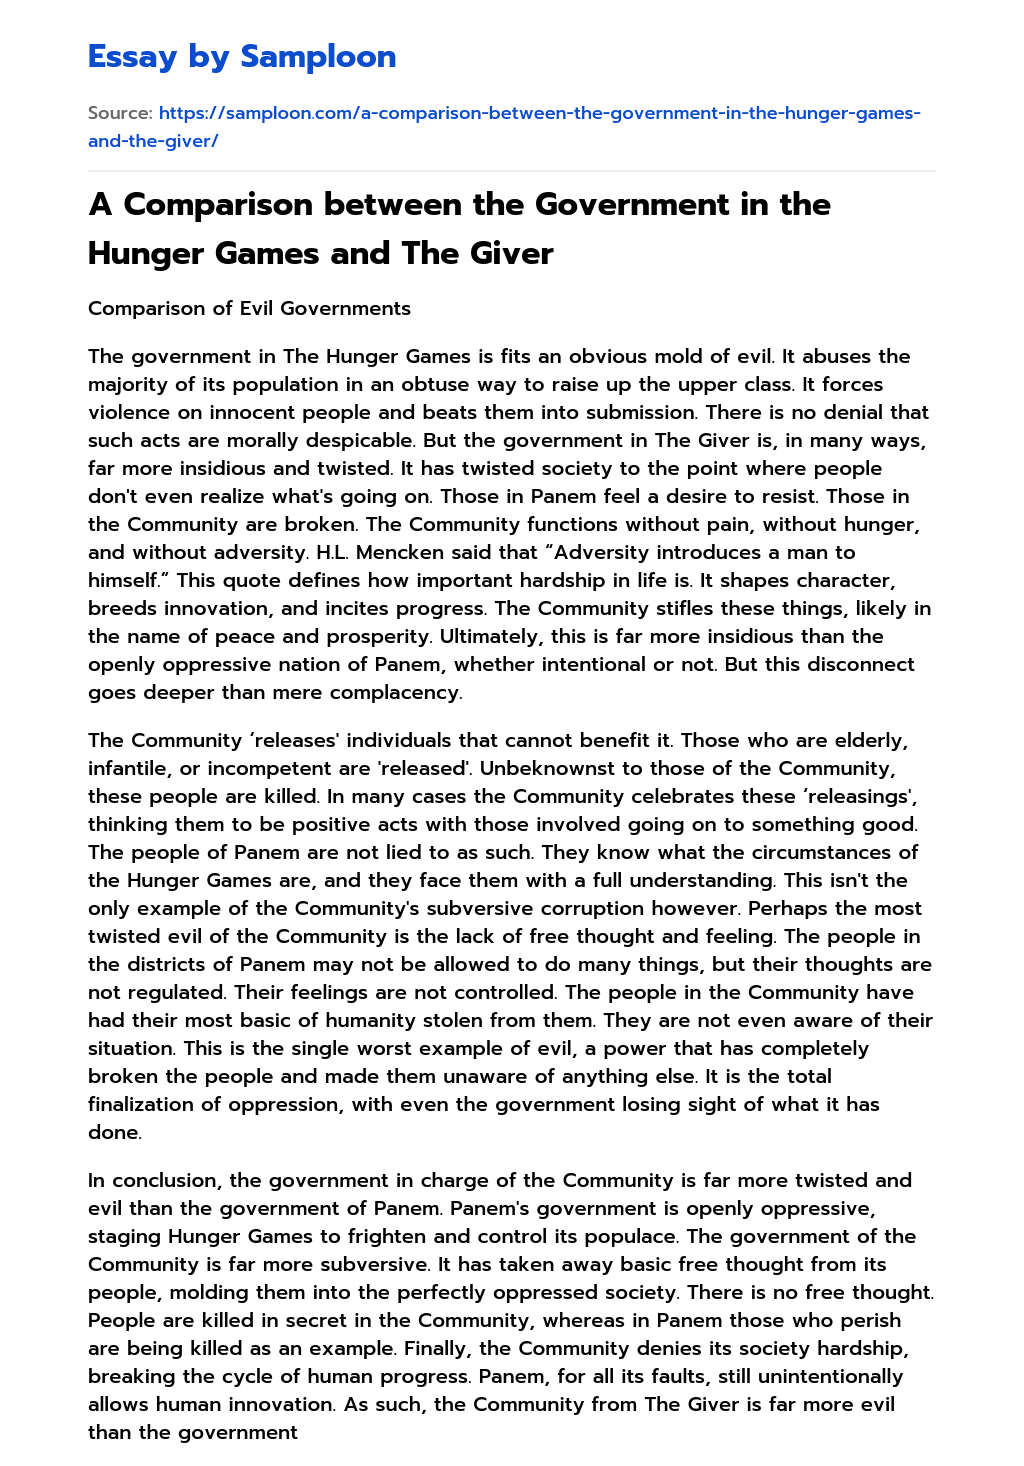 A Comparison between the Government in the Hunger Games and The Giver essay